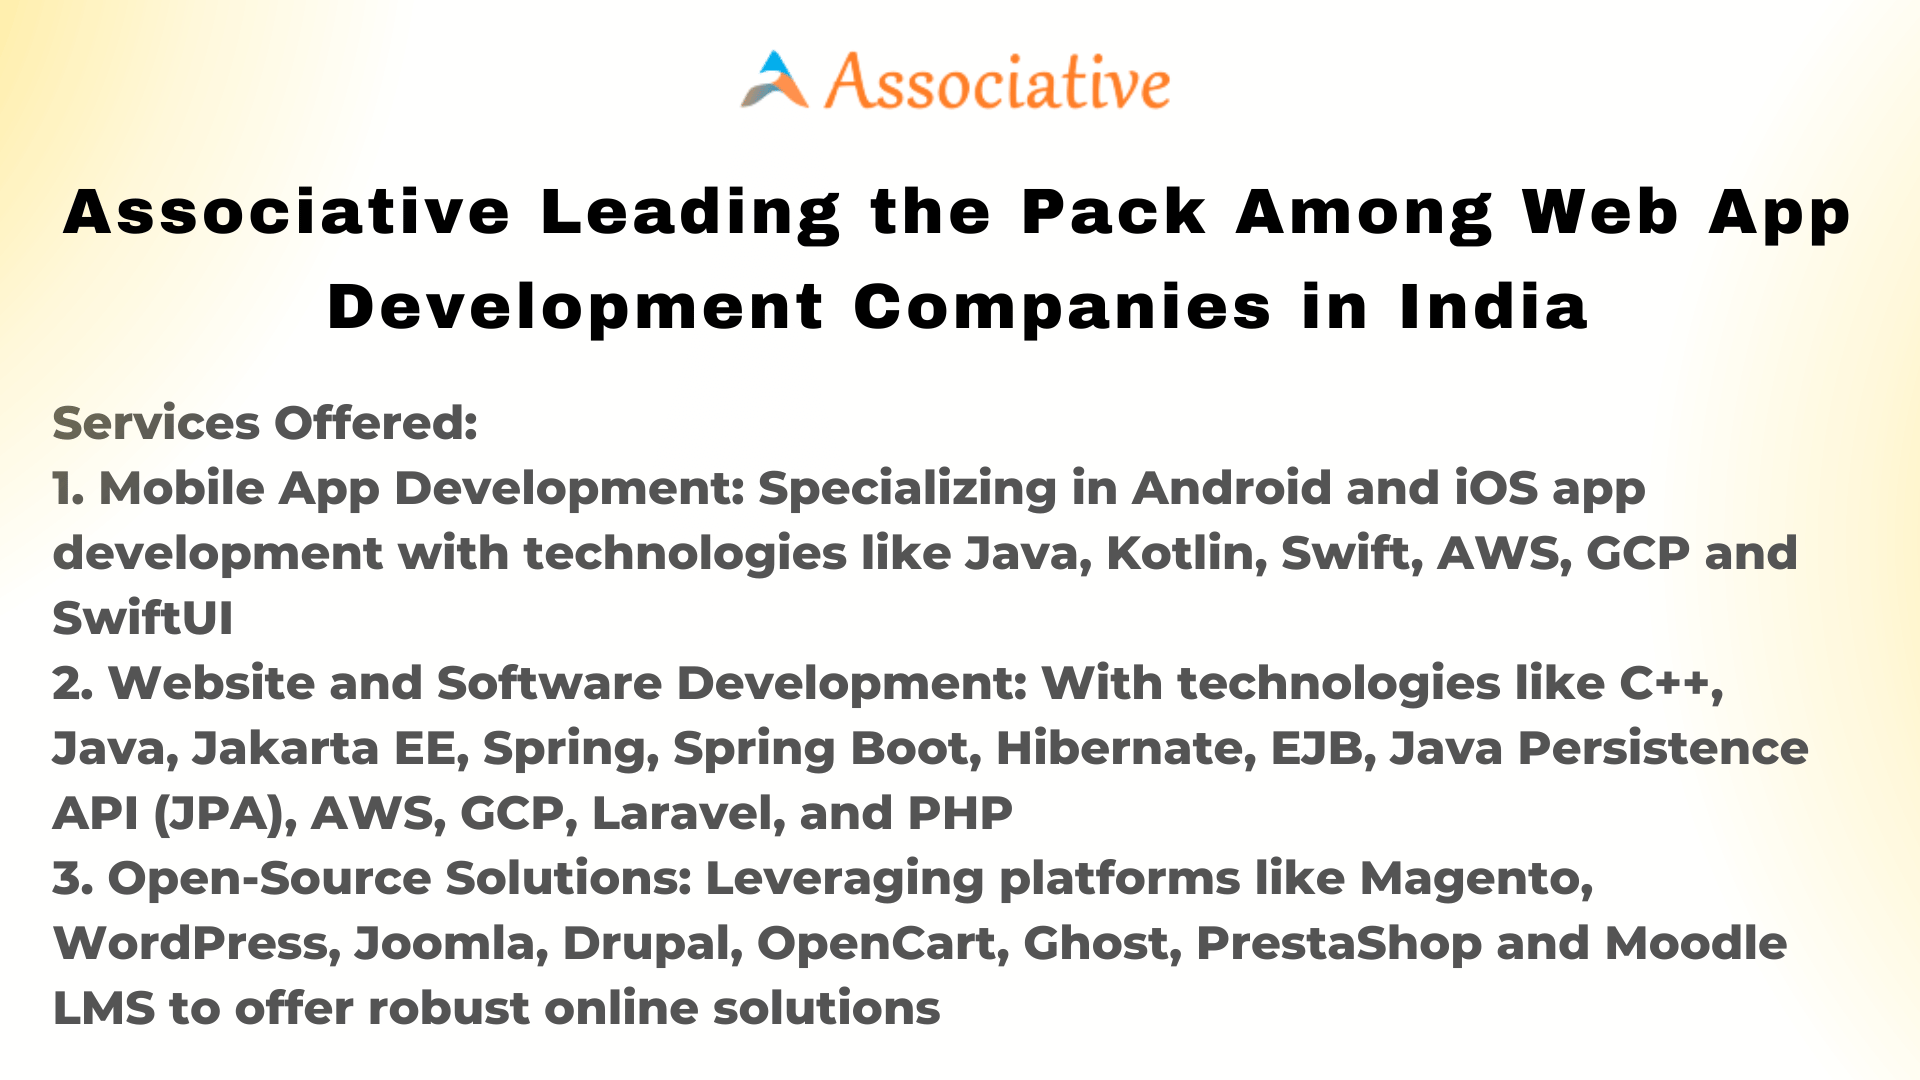 Associative Leading the Pack Among Web App Development Companies in India